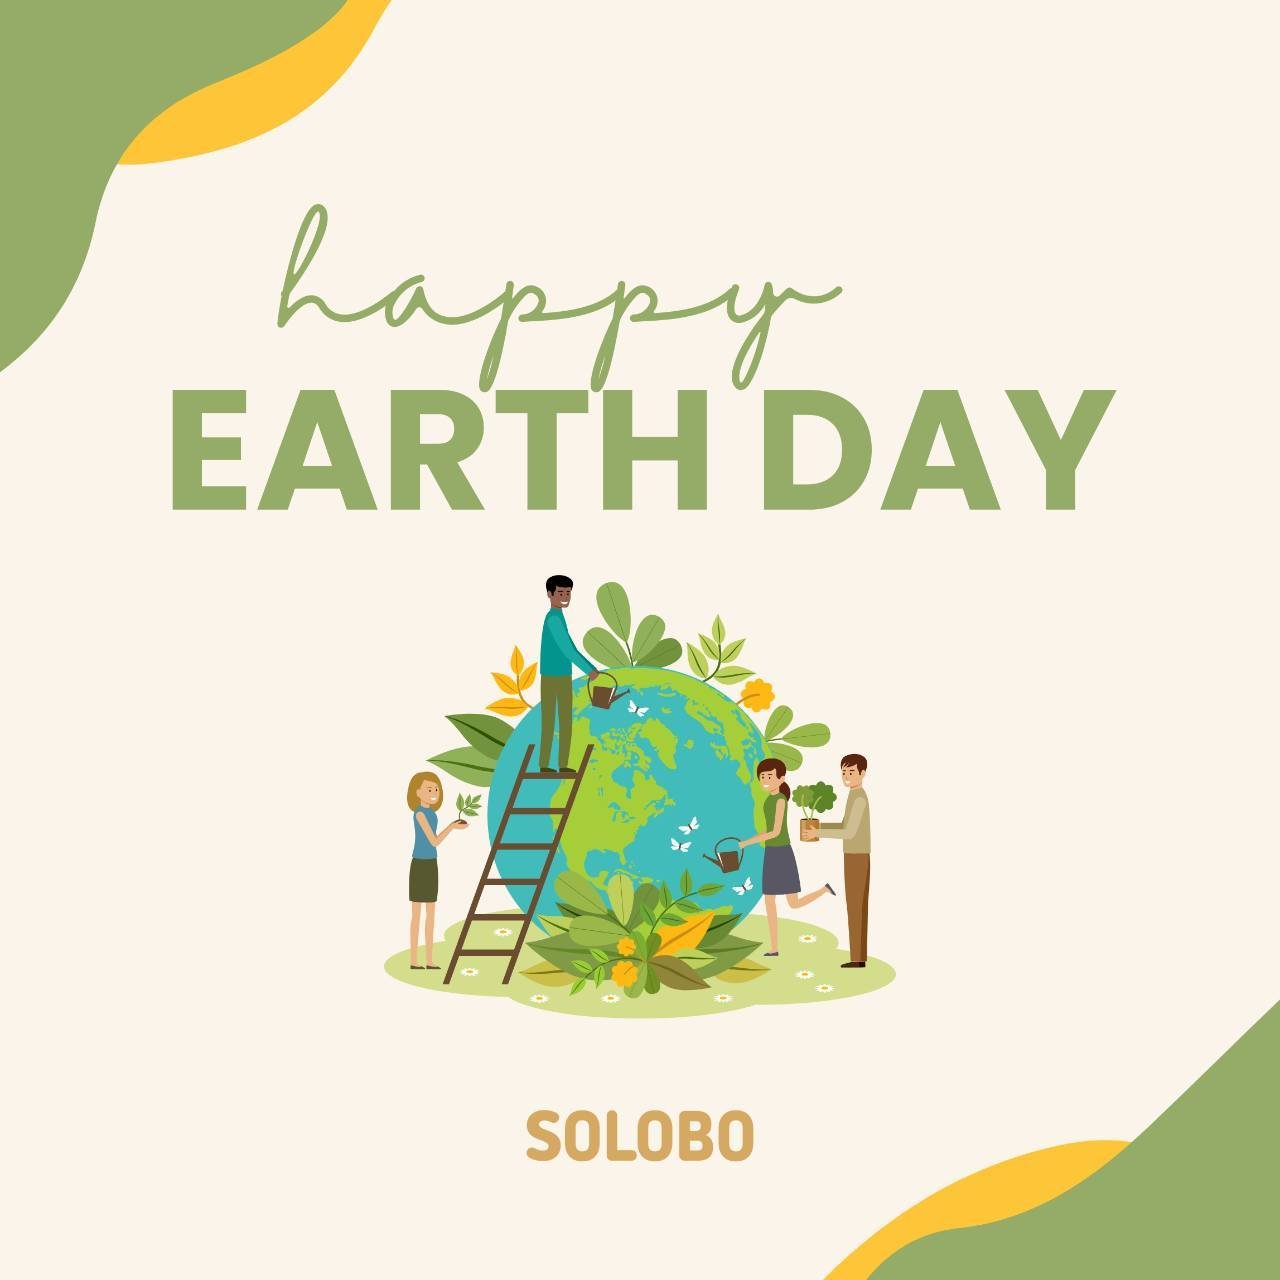 Happy Earth Day!! 🌳

At Solobo, we are committed to reducing our impact on the environment. In addition to our wooden toys using FSC Certified wood, we also plant a tree through One Tree Planted for every order placed on our website! 🌏